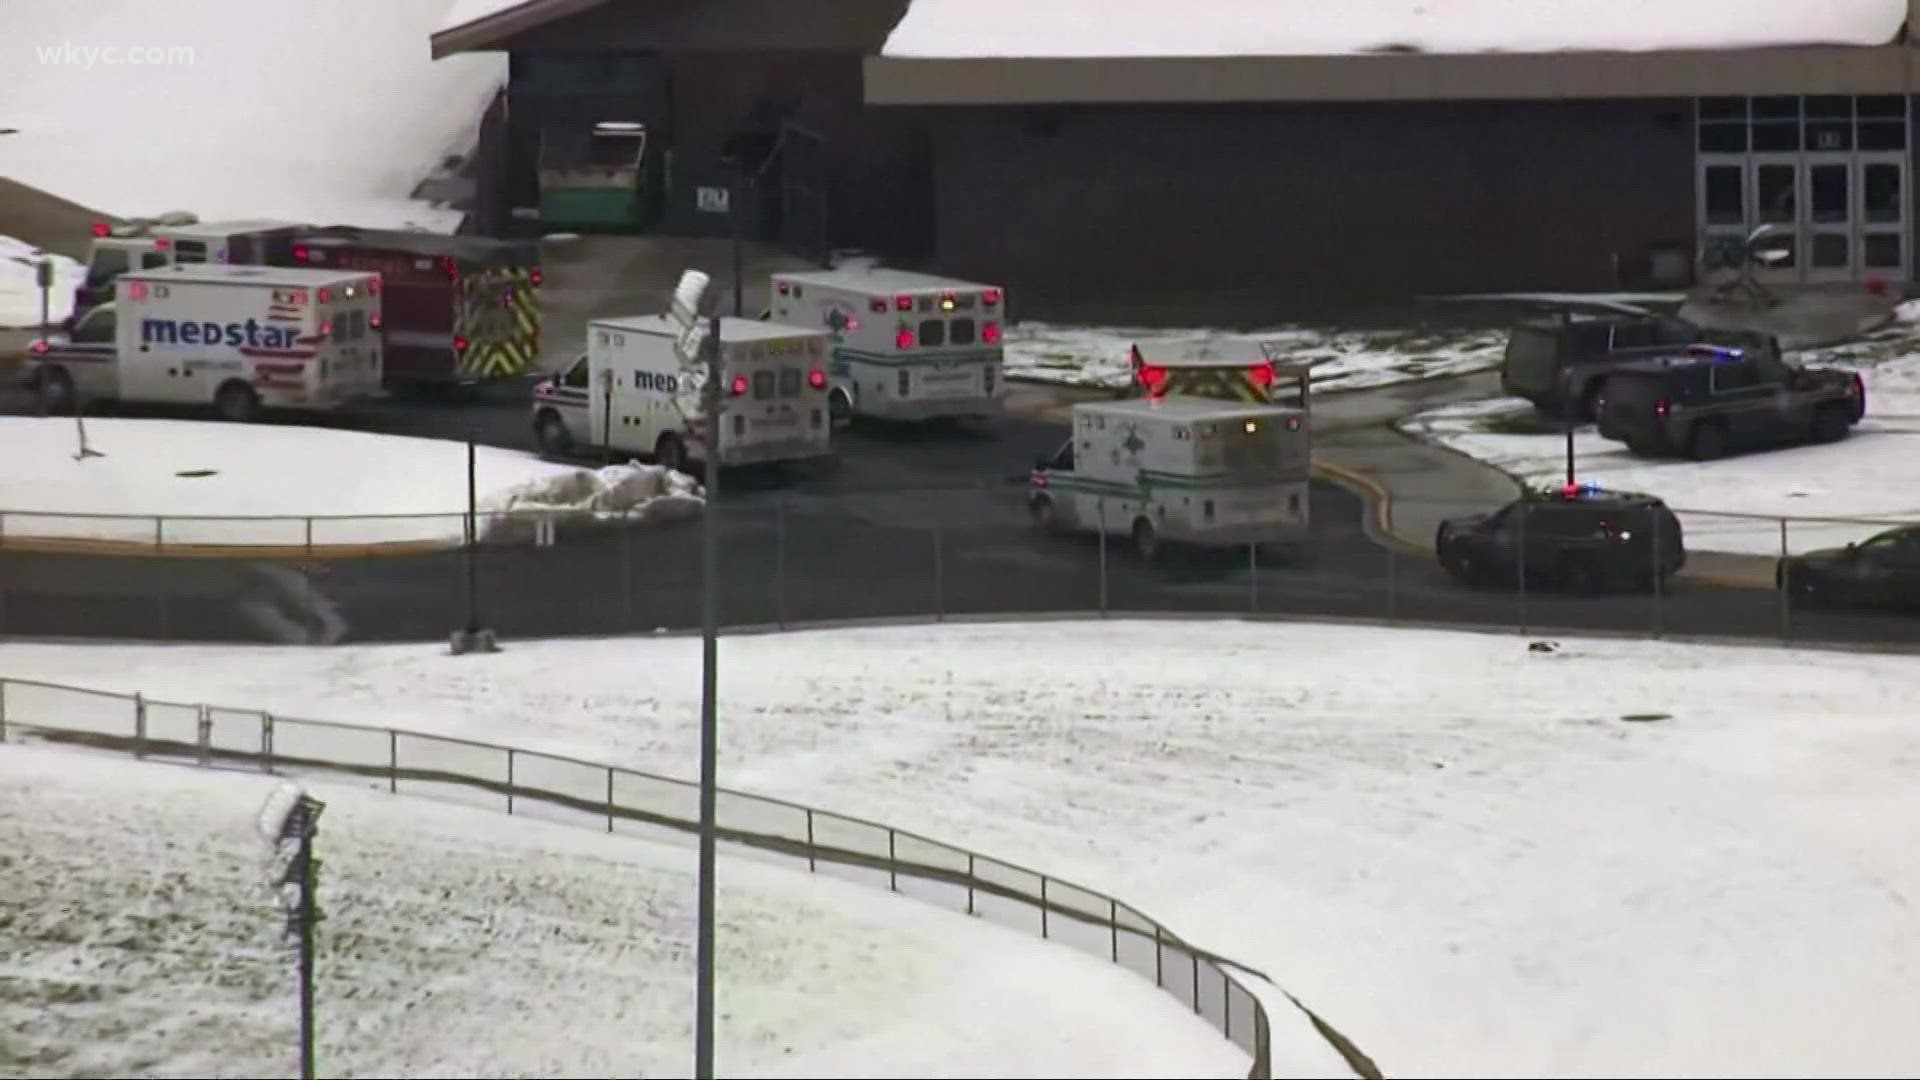 Here's what we know about the deadly shooting at a high school in Michigan.